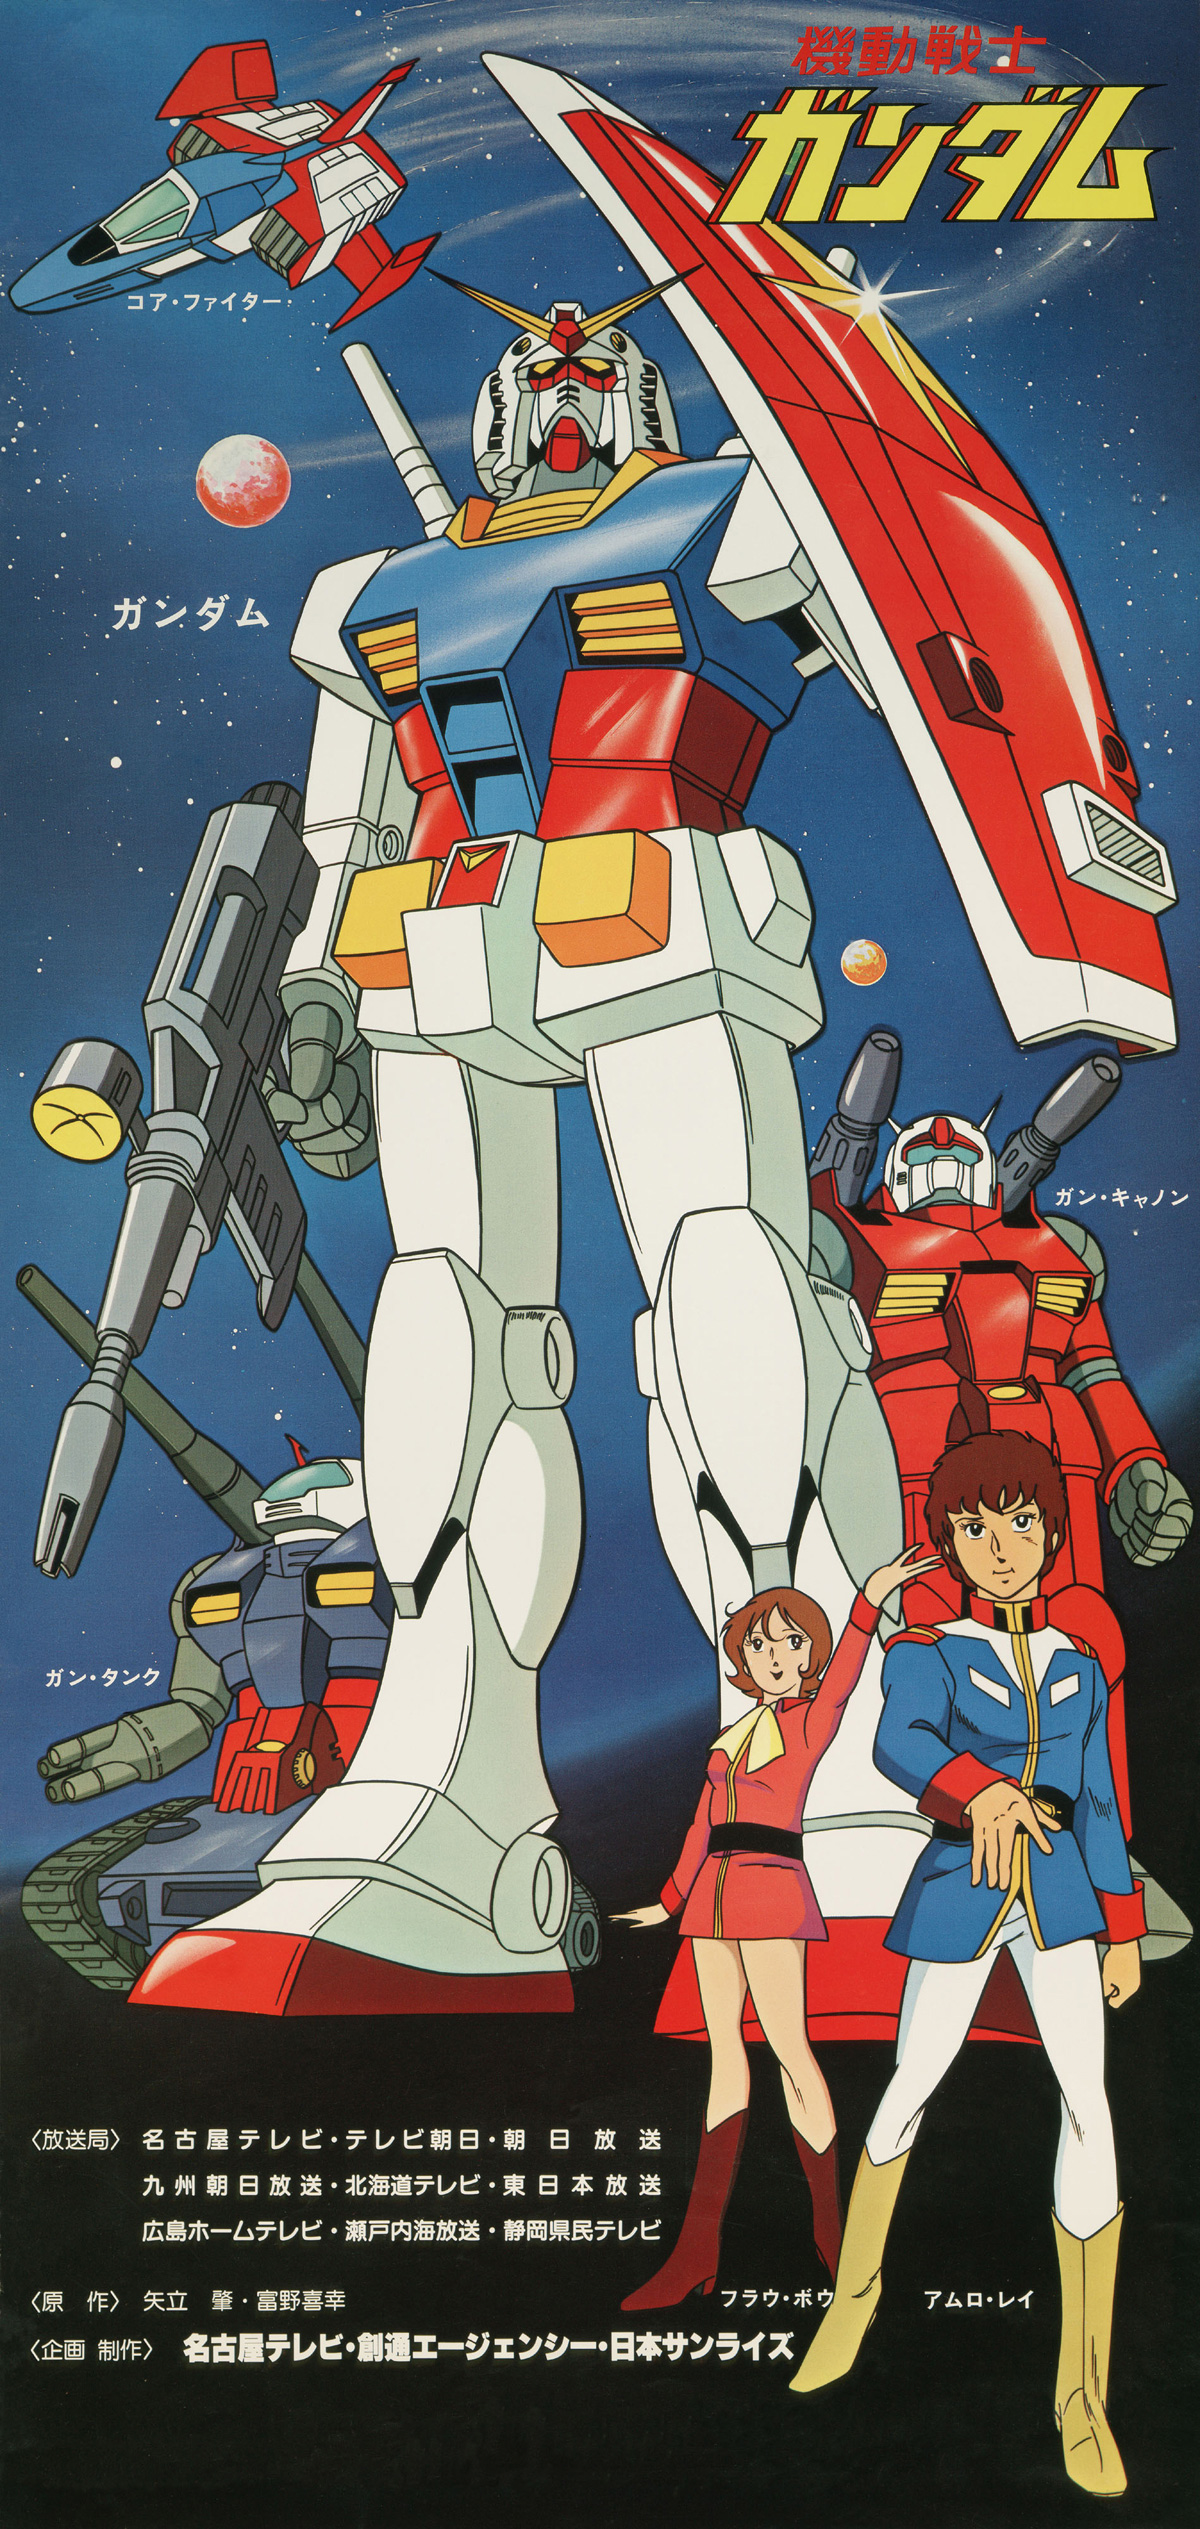 A New Gundam and the Importance of Lewd Anime | J-List Blog